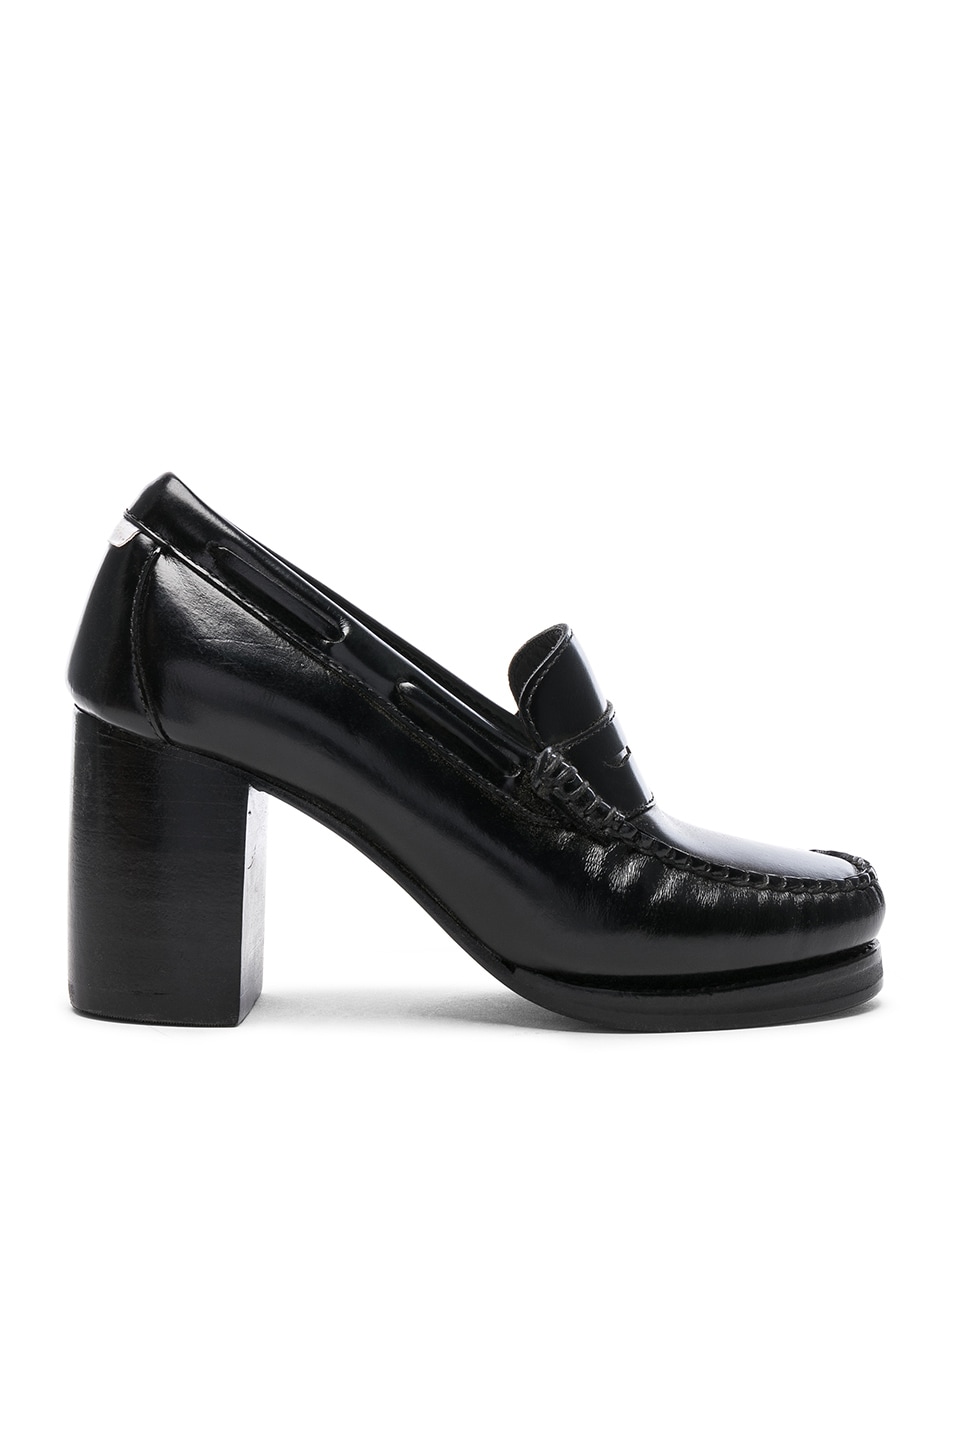 Image 1 of RE/DONE x G.H. Bass & Co. Winsome Heeled Loafer in Black Box